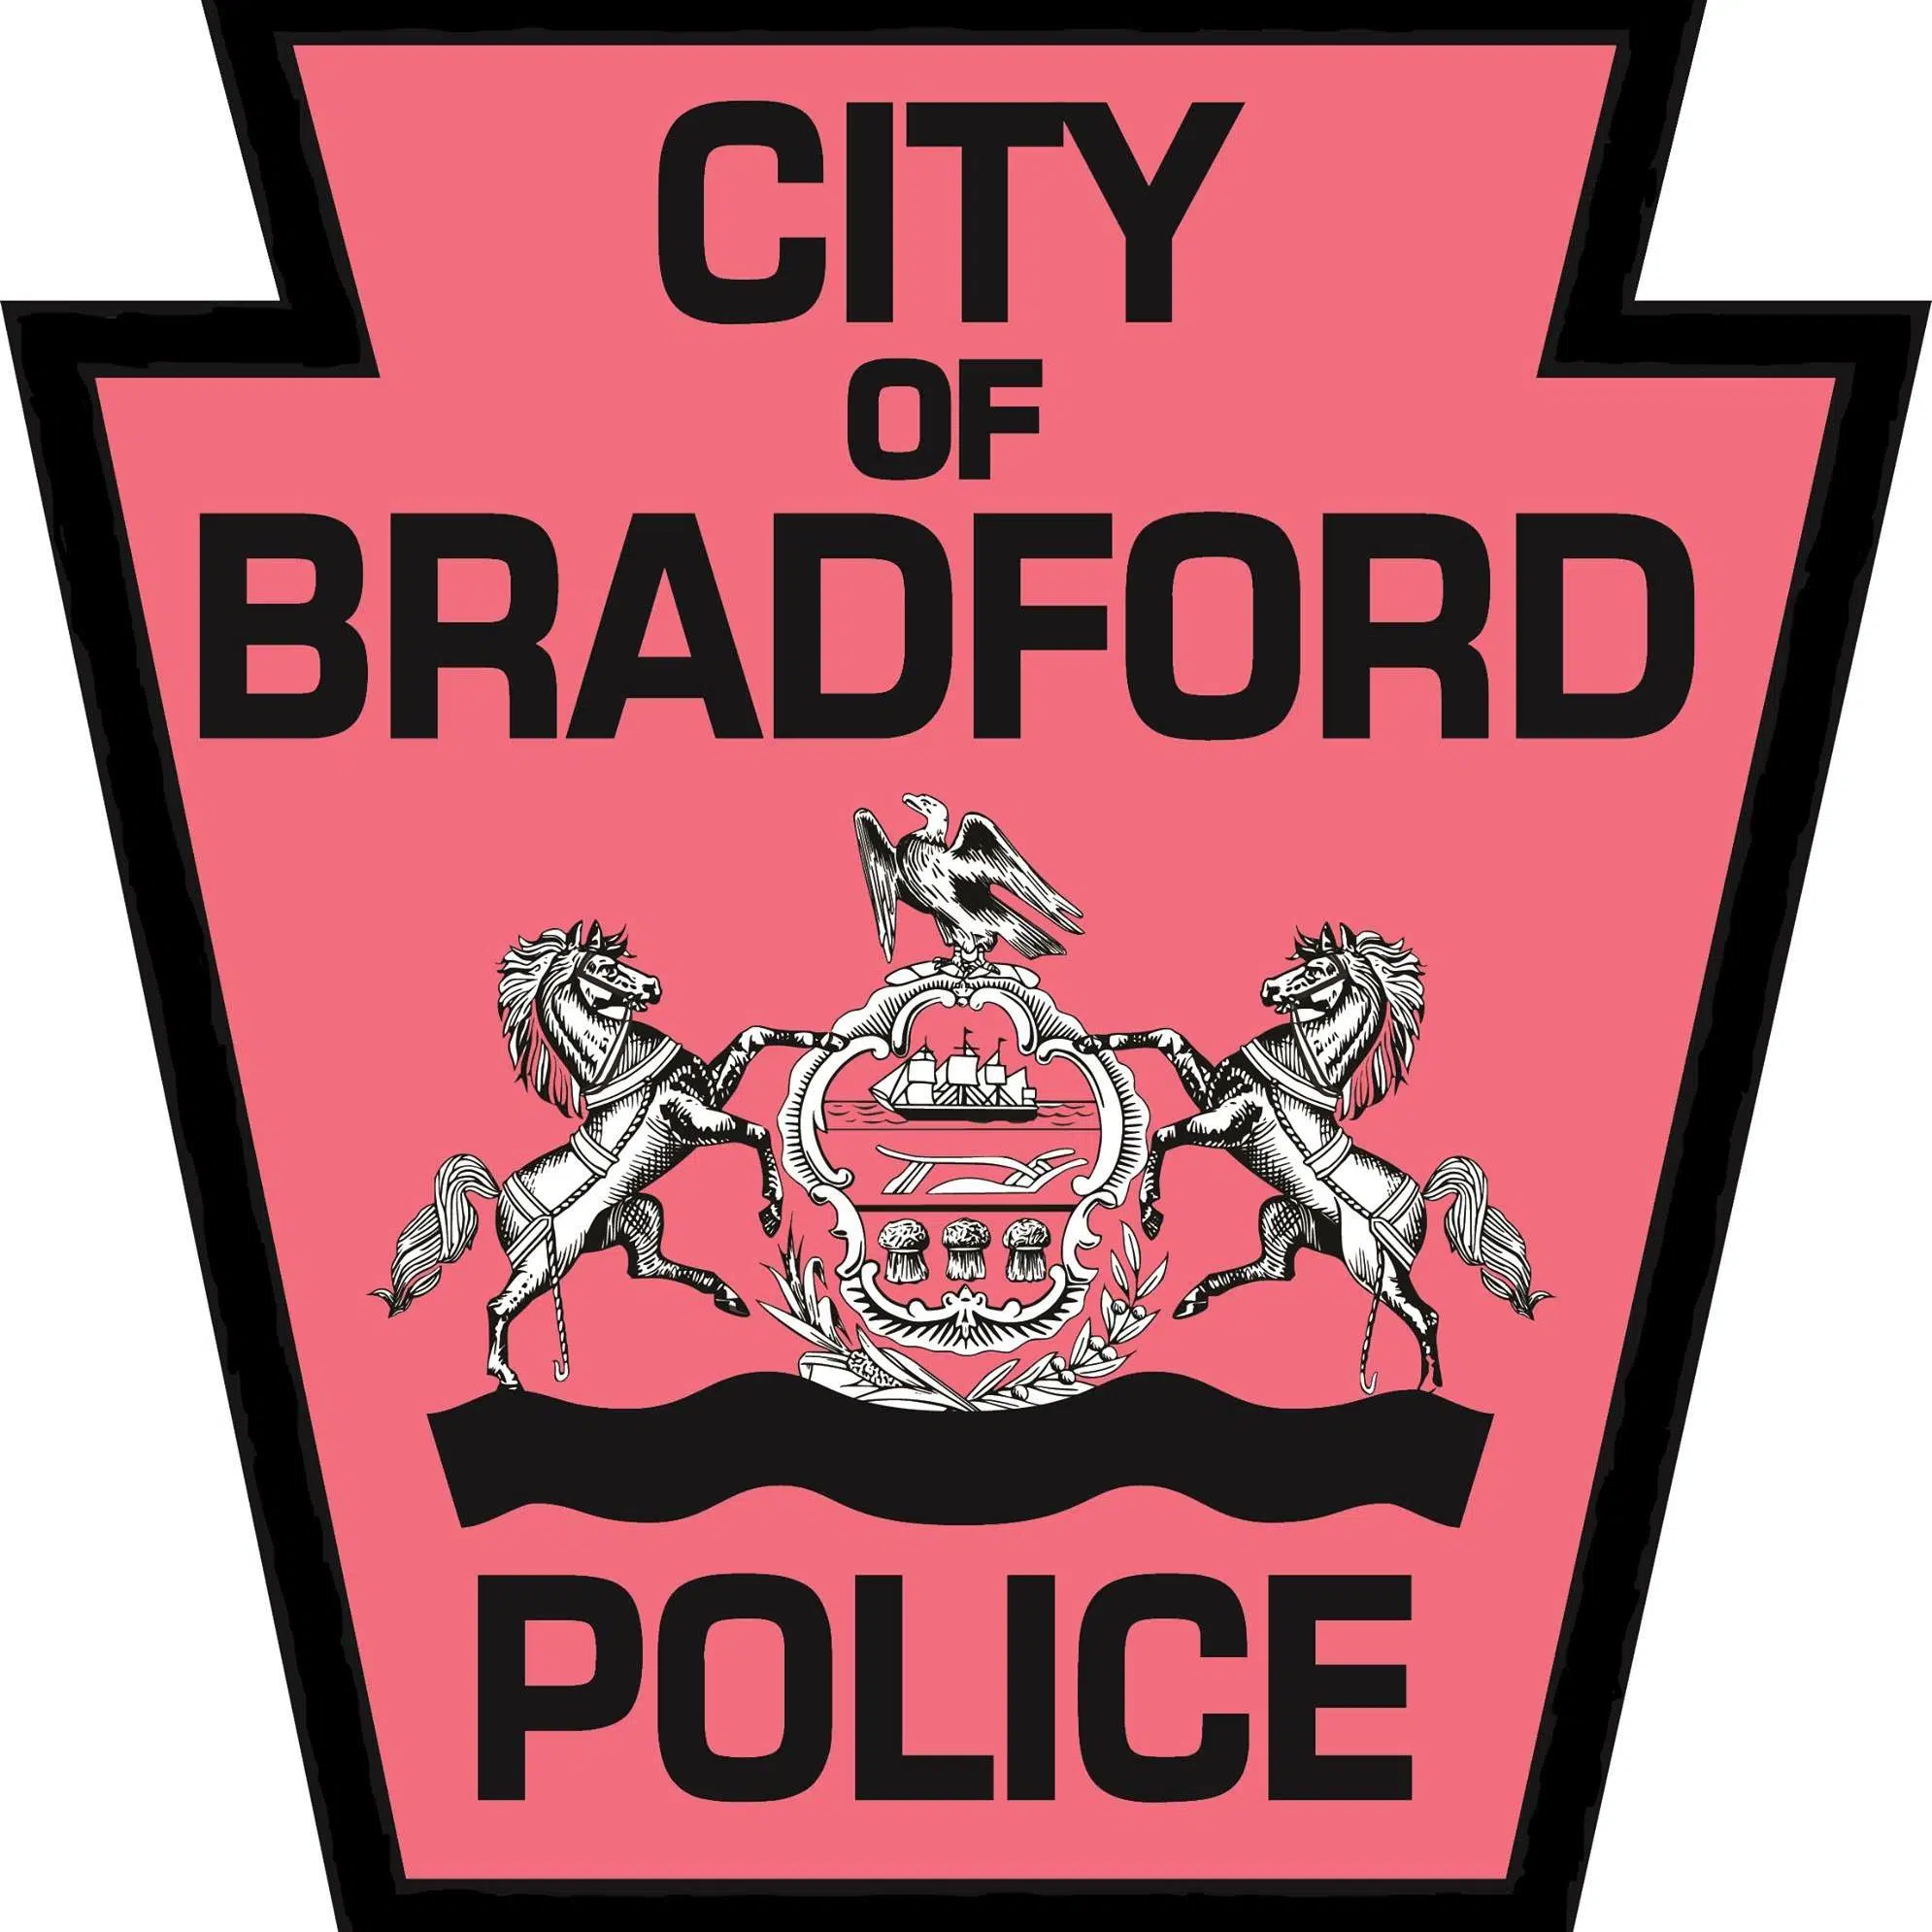 Bradford Man Arrested for Disorderly Conduct